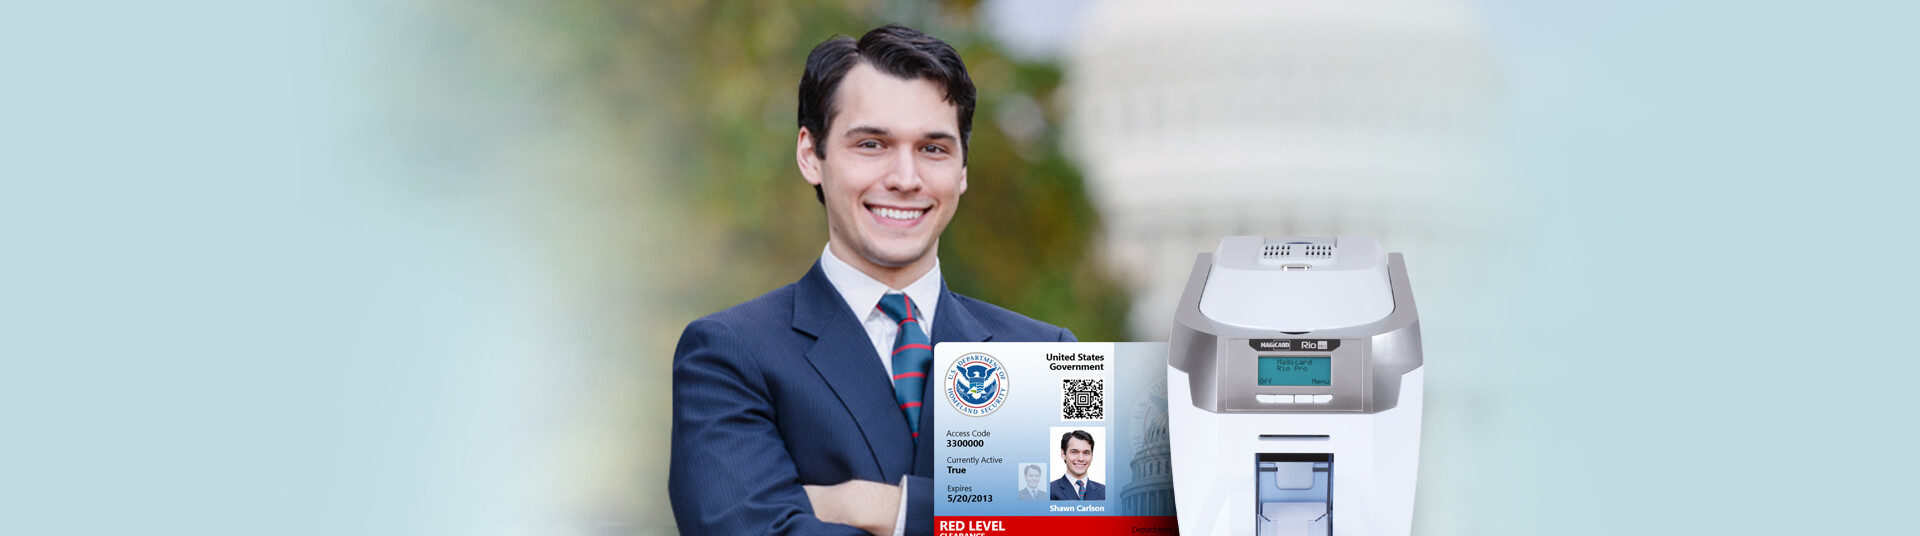 Government ID Cards for Access Control